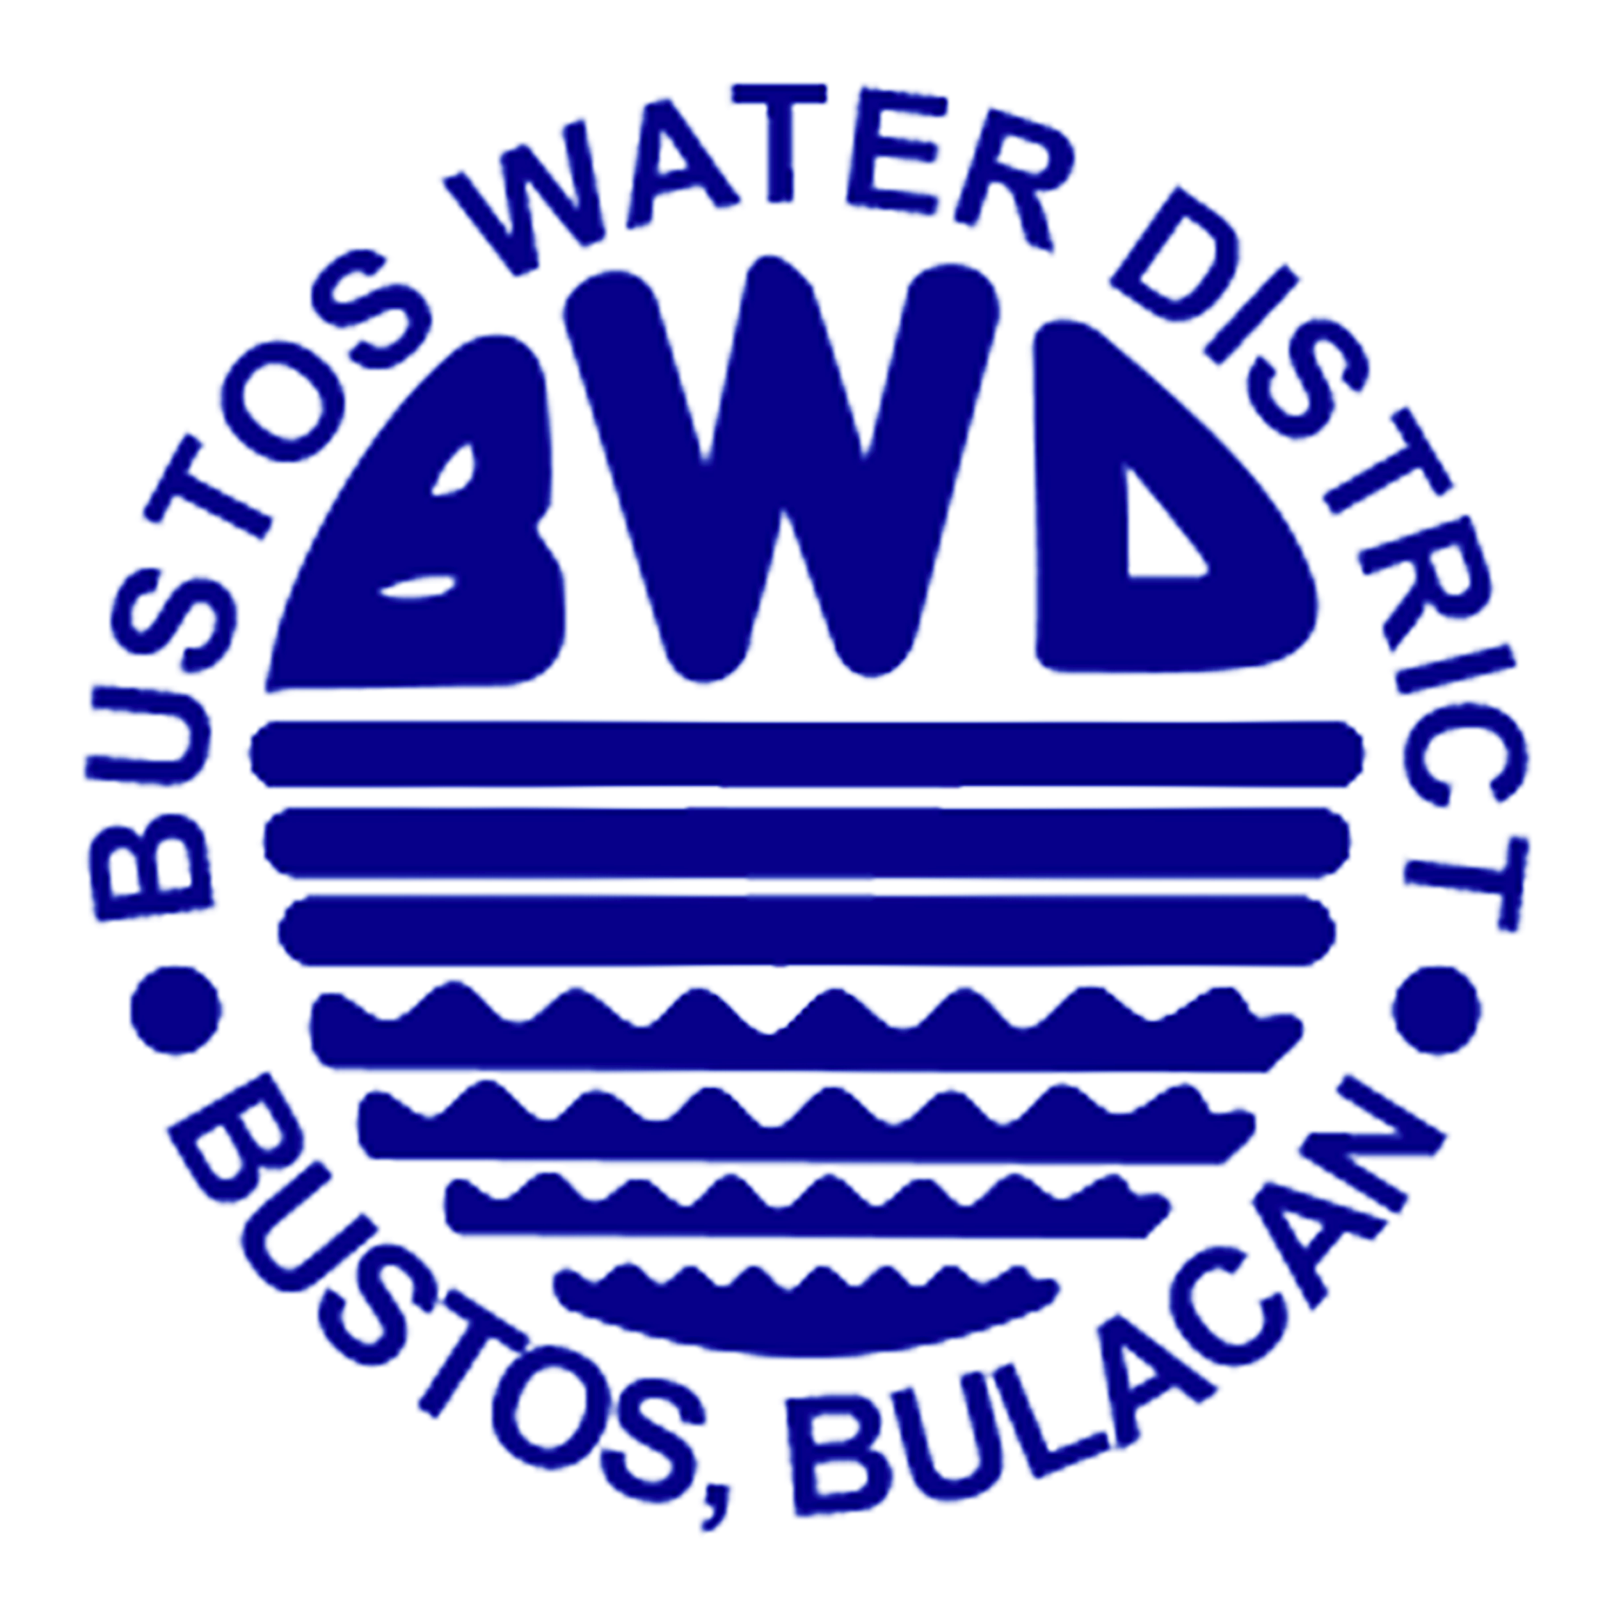 BUSTOS WATER DISTRICT